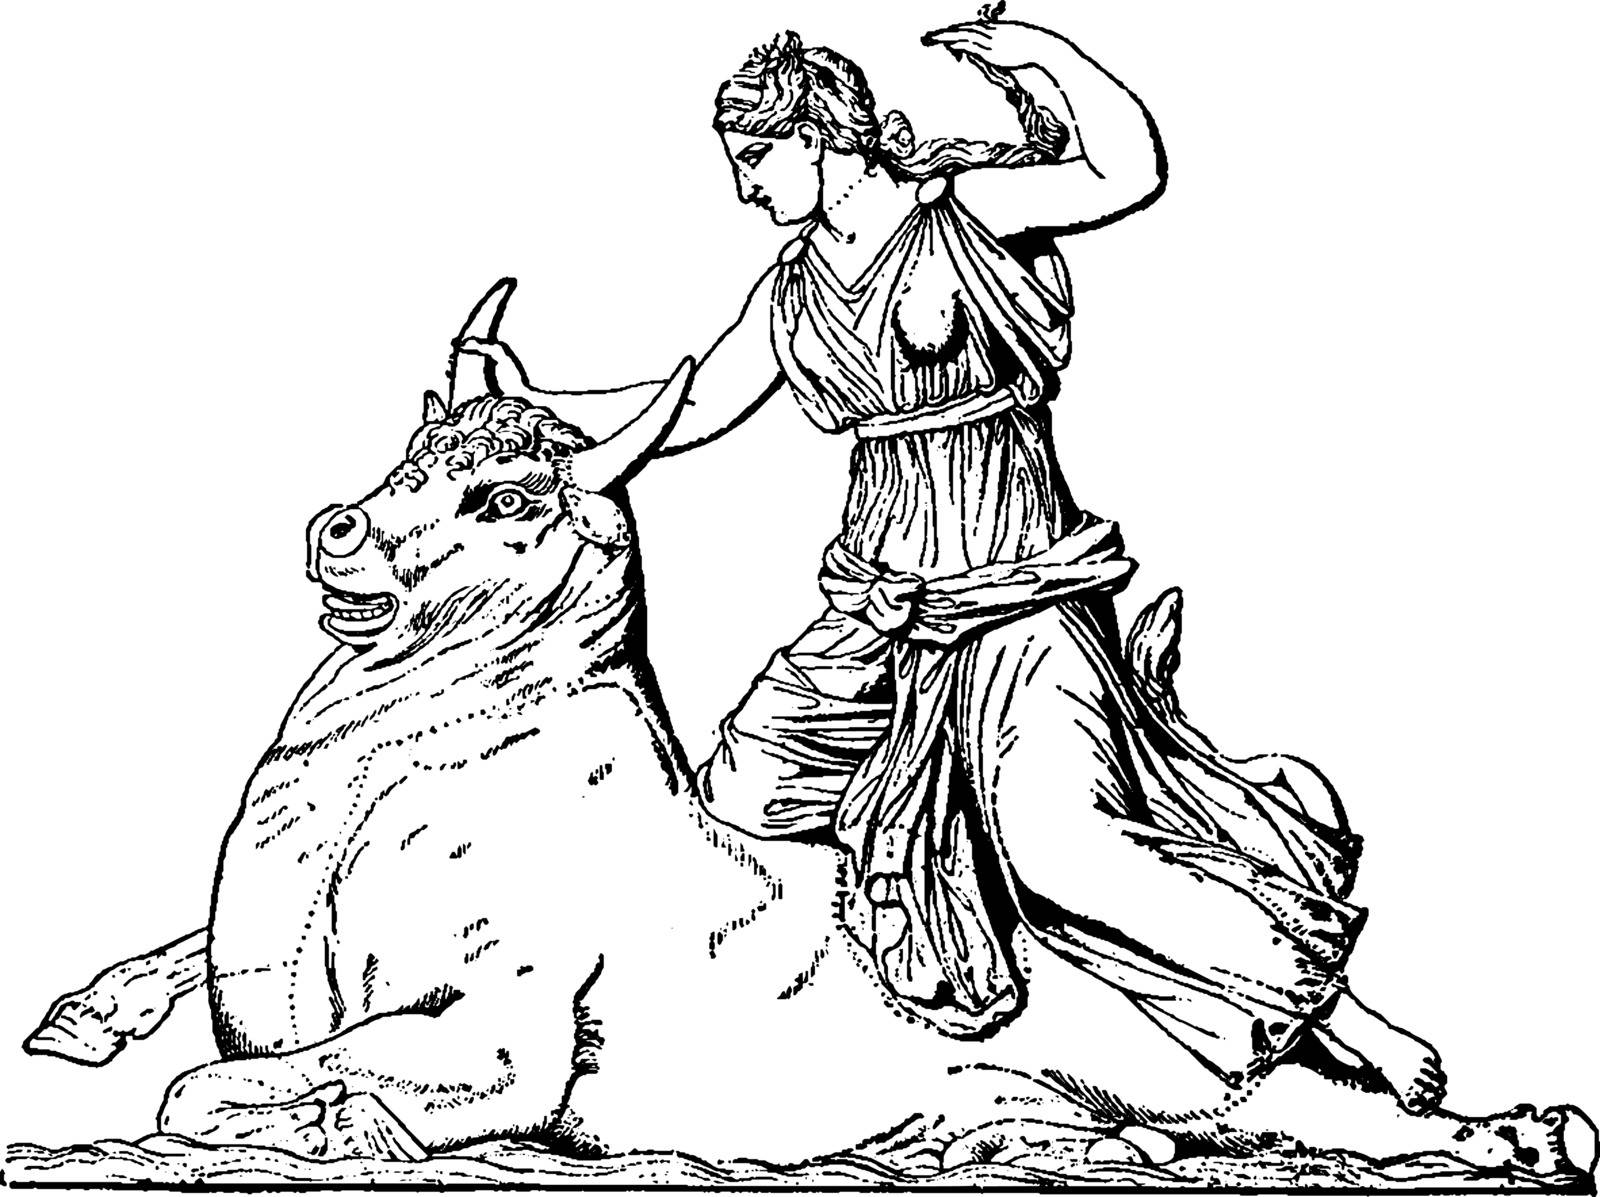 In this frame there are two statues of a bull and a woman. She is killing a bull, vintage line drawing or engraving illustration.